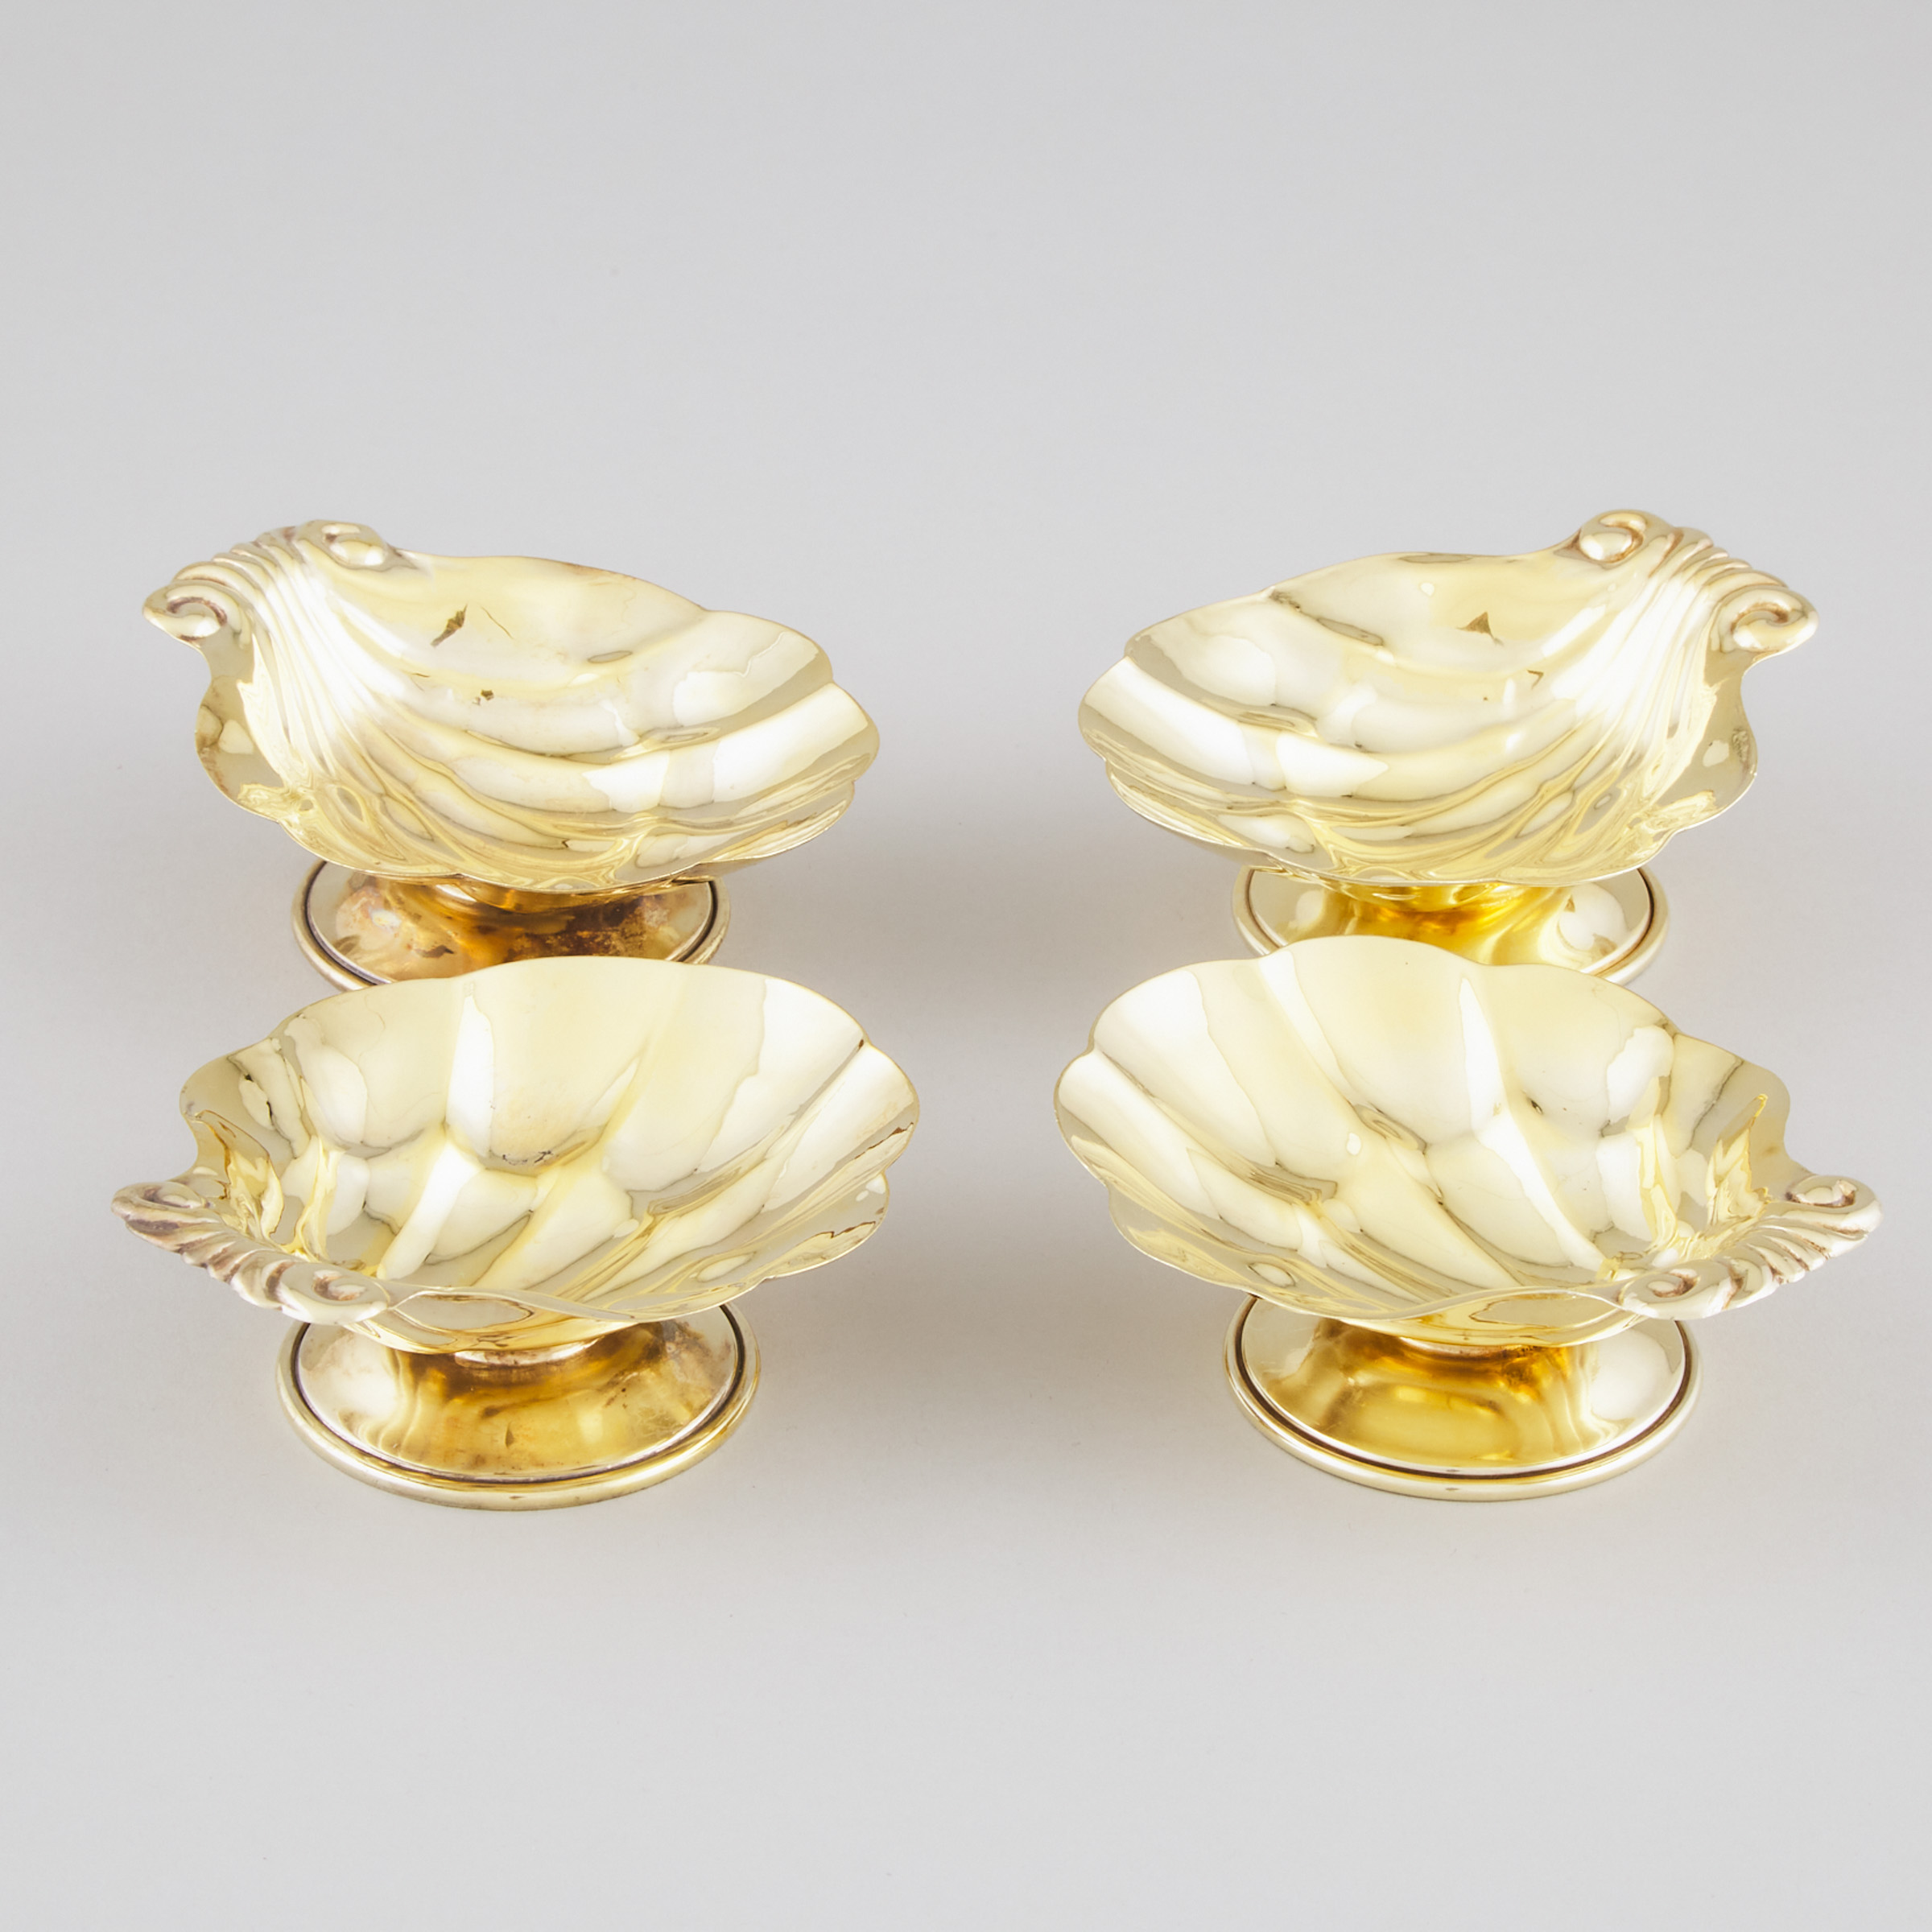 Four Canadian Silver-Gilt Shell Shaped Nut Dishes, Carl Poul Petersen, Montreal, Que., mid-20th century